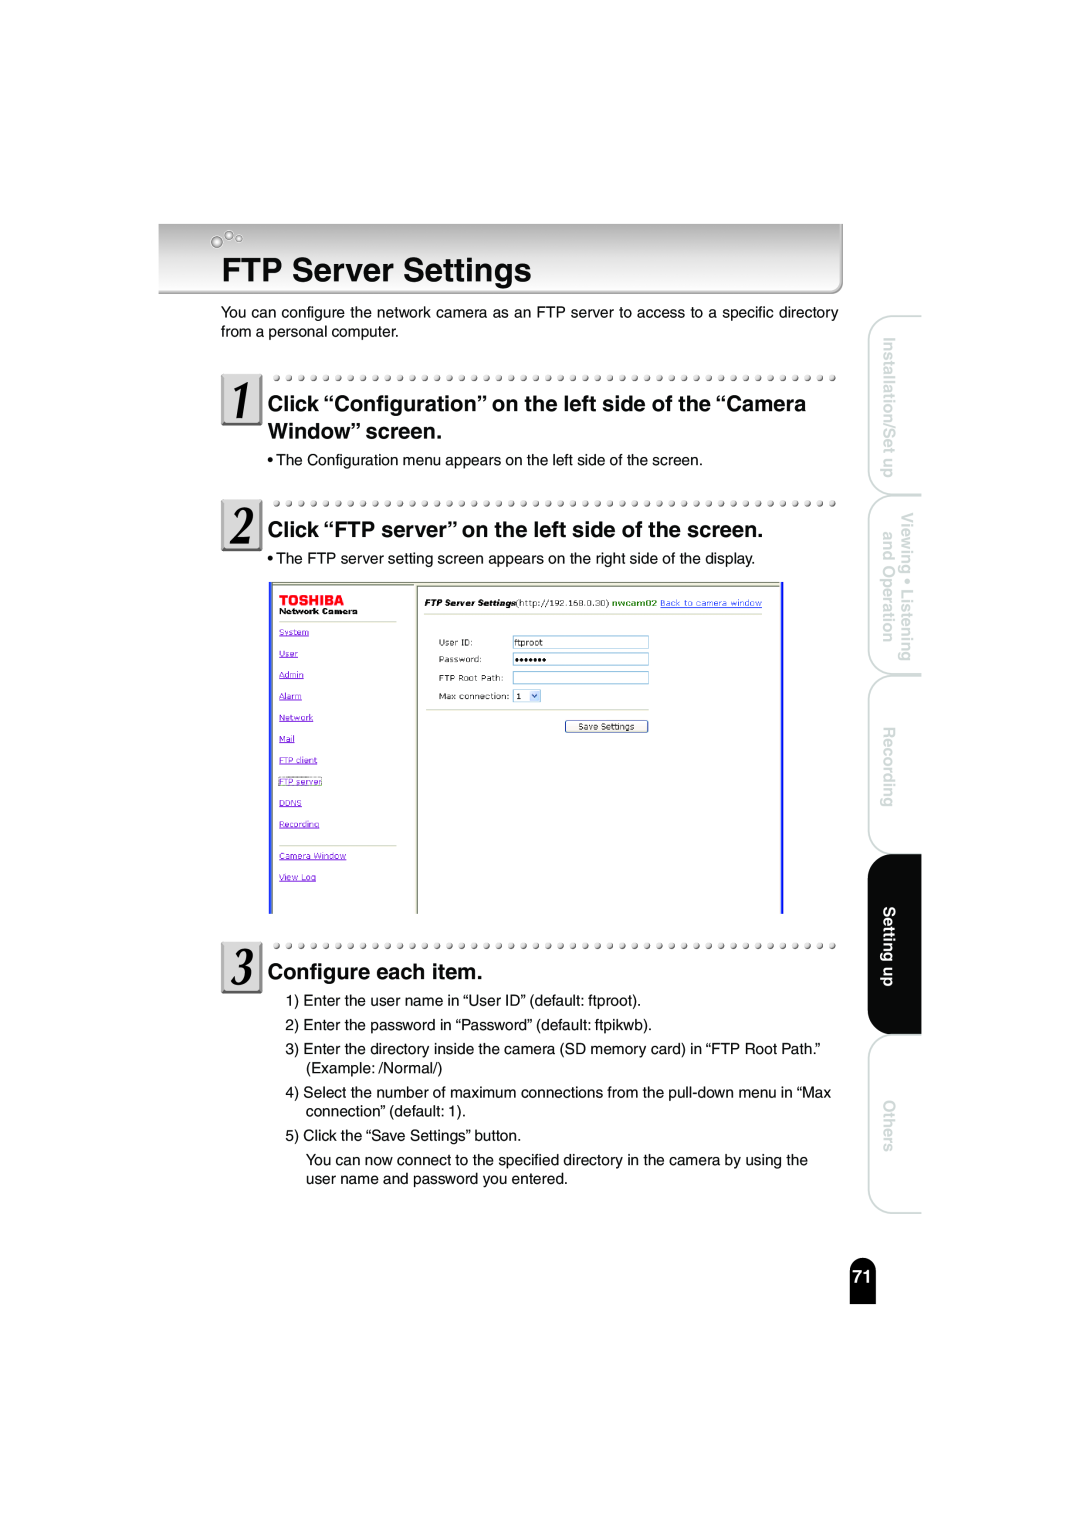 Toshiba IK-WB02A FTP Server Settings, Click “FTP server” on the left side of the screen, Configure each item, Recording 